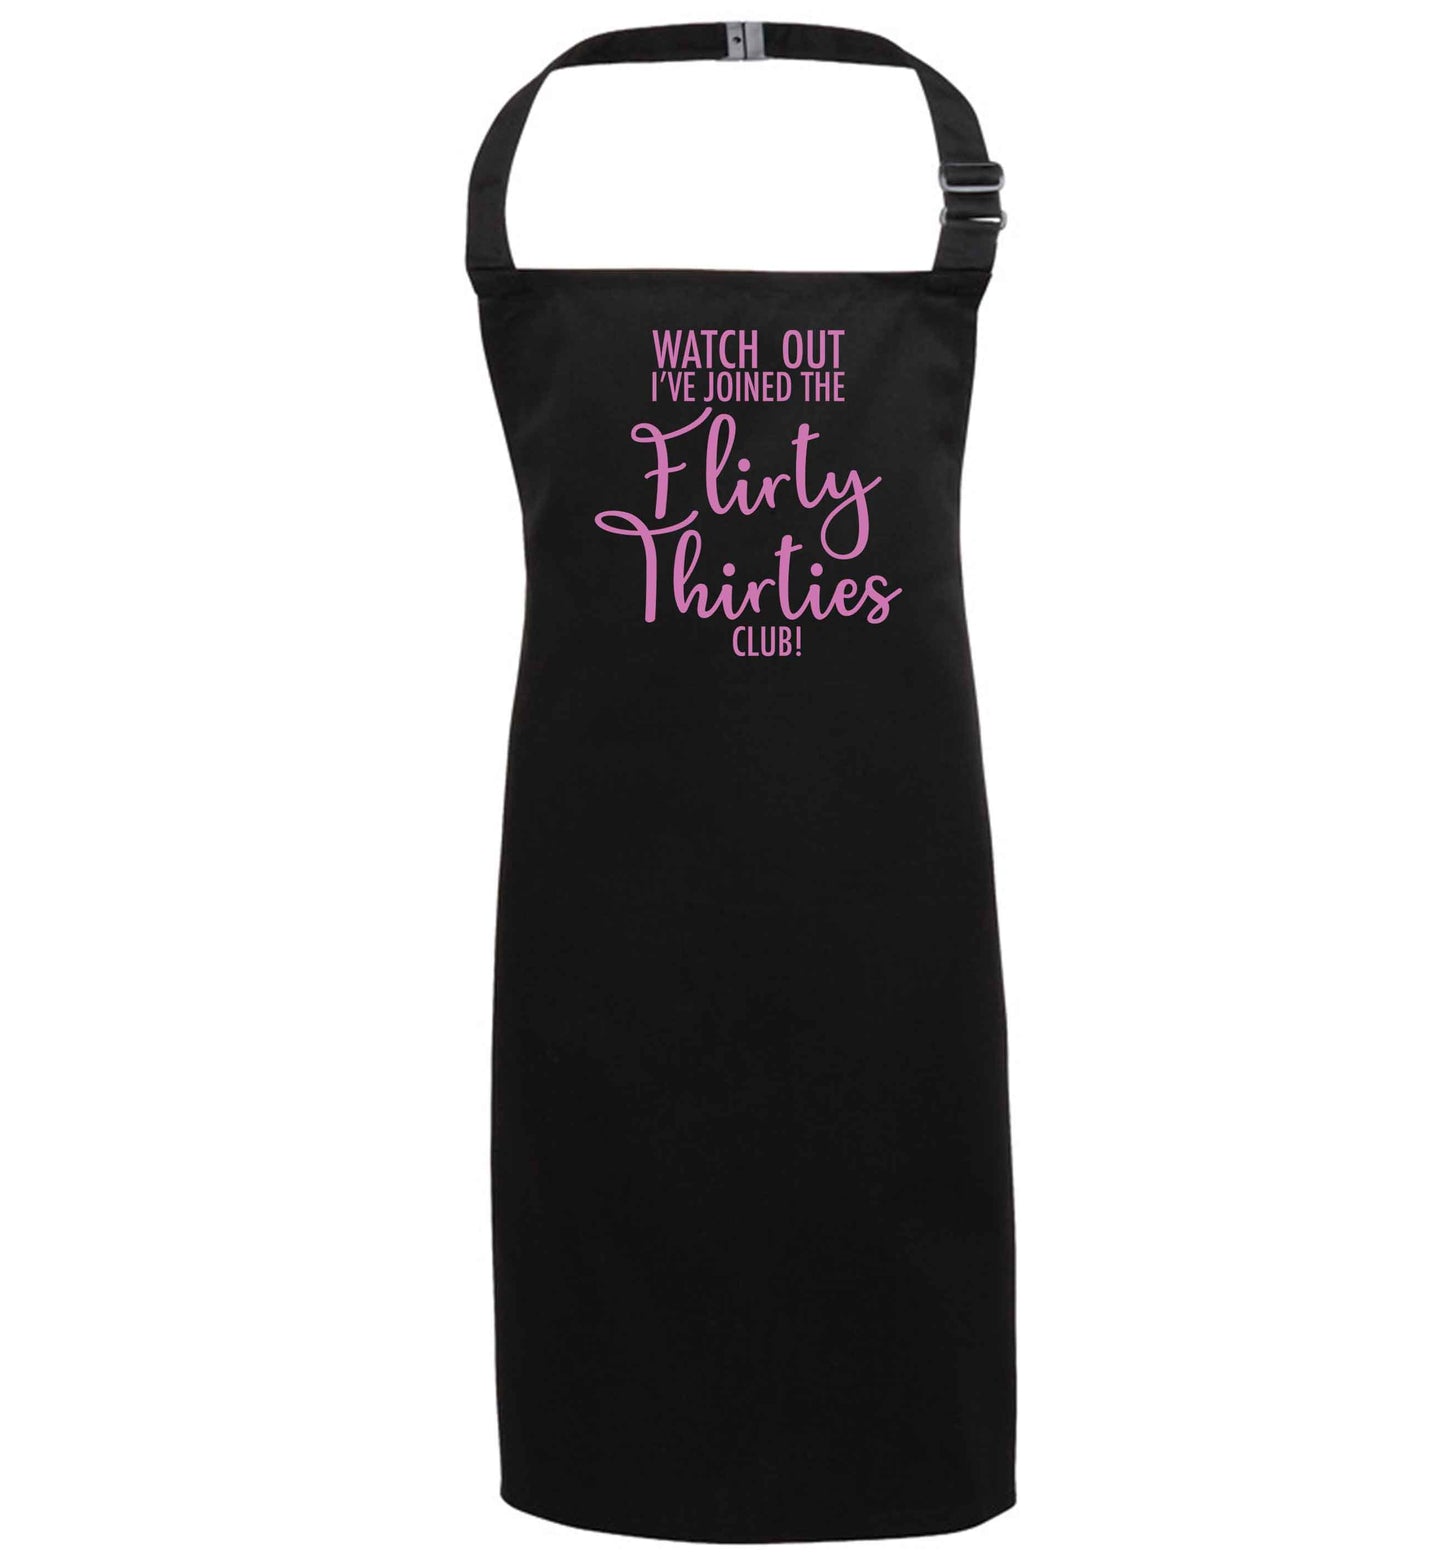 Watch out I've joined the flirty thirties club black apron 7-10 years